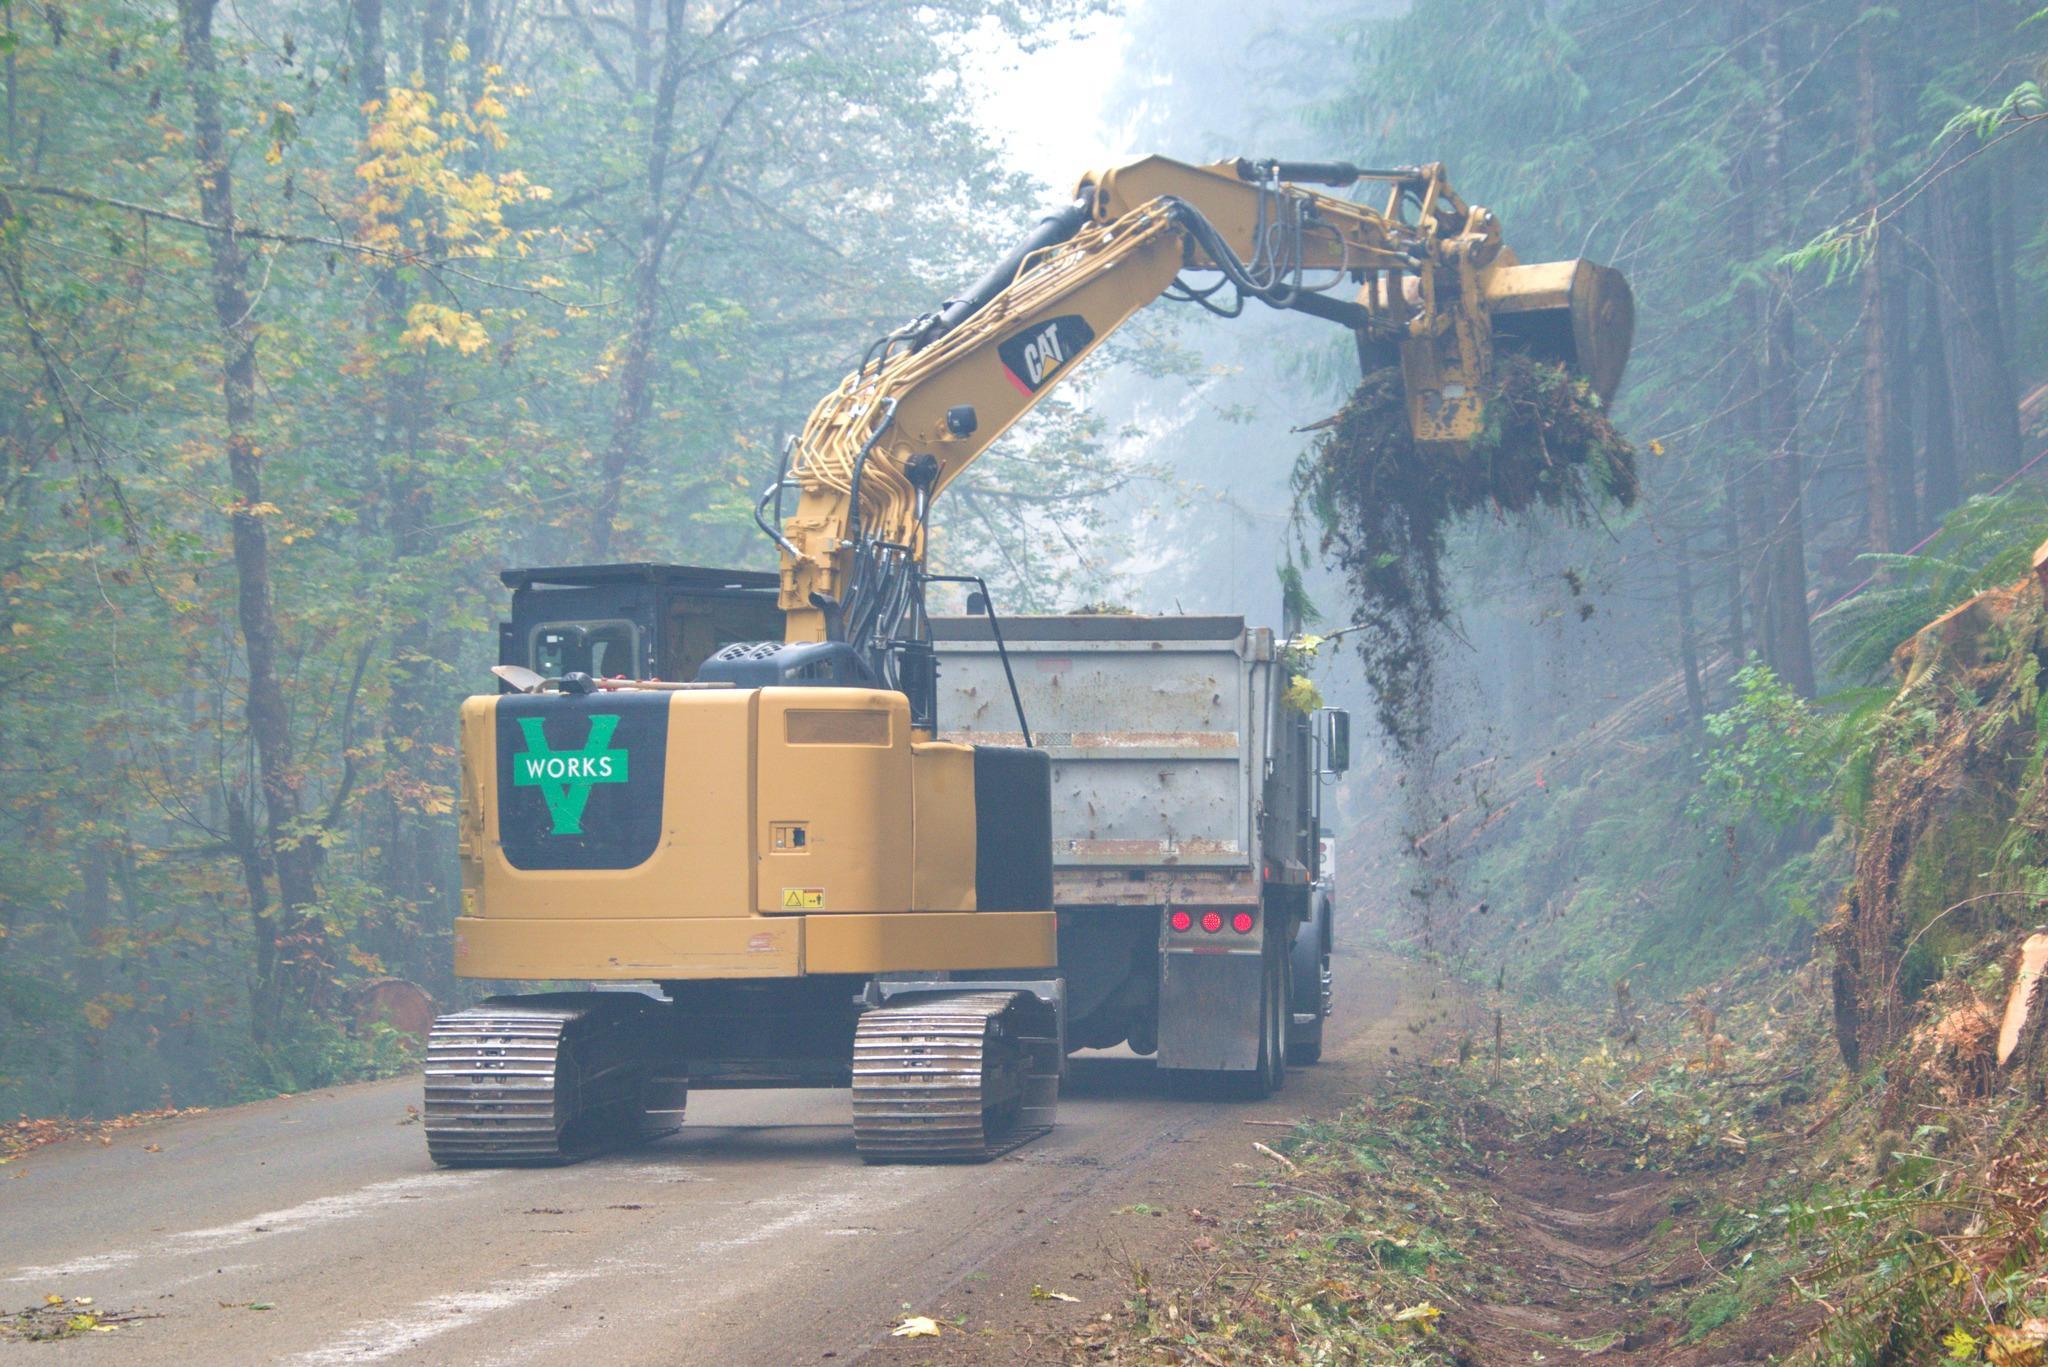 A large piece of heavy equipment know as an excavator uses a long arm with a claw bucket on the end to pick up vegetation debris along a road and place in a white dump truck.